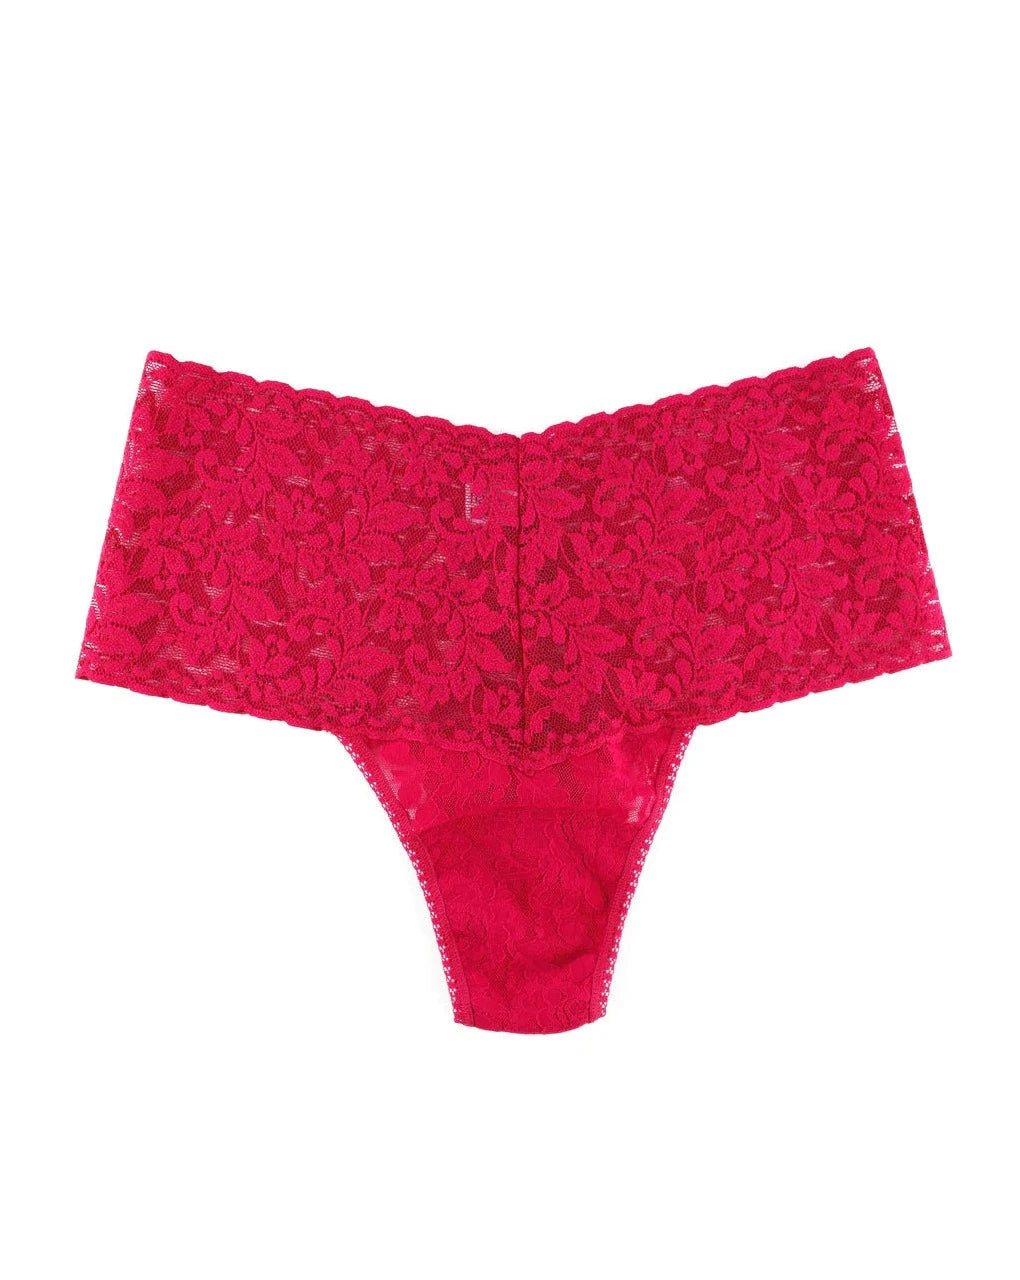 Retro Lace Thong - Beestung Lingerie